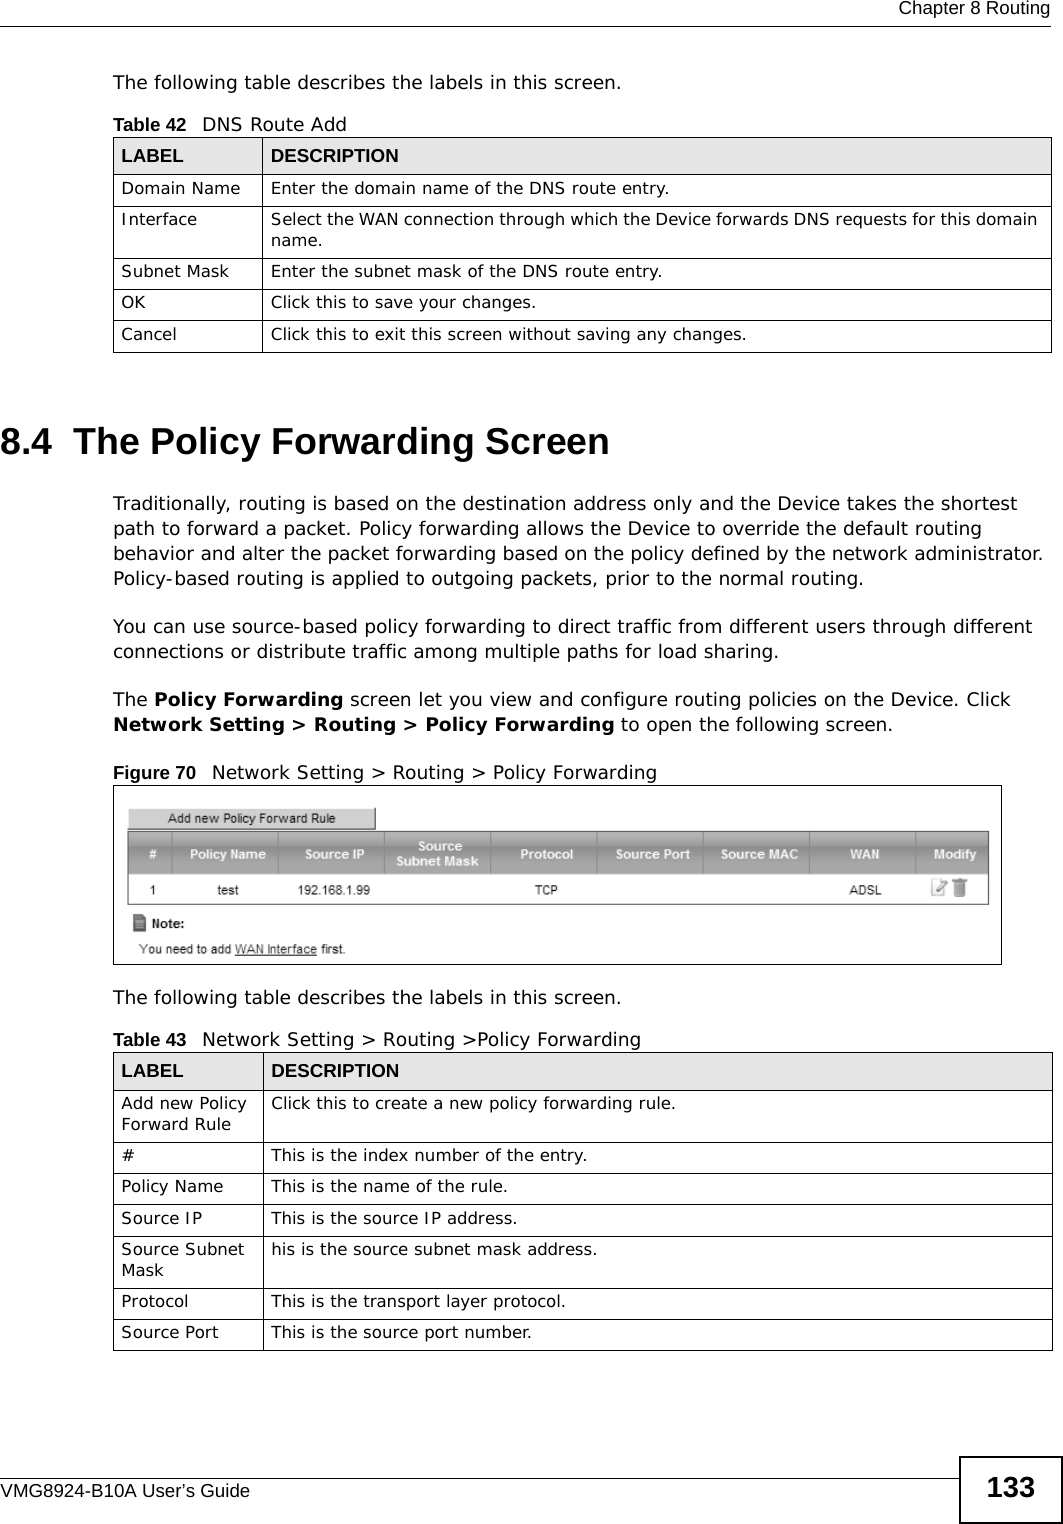  Chapter 8 RoutingVMG8924-B10A User’s Guide 133The following table describes the labels in this screen. 8.4  The Policy Forwarding ScreenTraditionally, routing is based on the destination address only and the Device takes the shortest path to forward a packet. Policy forwarding allows the Device to override the default routing behavior and alter the packet forwarding based on the policy defined by the network administrator. Policy-based routing is applied to outgoing packets, prior to the normal routing.You can use source-based policy forwarding to direct traffic from different users through different connections or distribute traffic among multiple paths for load sharing.The Policy Forwarding screen let you view and configure routing policies on the Device. Click Network Setting &gt; Routing &gt; Policy Forwarding to open the following screen.Figure 70   Network Setting &gt; Routing &gt; Policy ForwardingThe following table describes the labels in this screen. Table 42   DNS Route AddLABEL DESCRIPTIONDomain Name Enter the domain name of the DNS route entry.Interface Select the WAN connection through which the Device forwards DNS requests for this domain name.Subnet Mask Enter the subnet mask of the DNS route entry.OK Click this to save your changes.Cancel Click this to exit this screen without saving any changes.Table 43   Network Setting &gt; Routing &gt;Policy ForwardingLABEL DESCRIPTIONAdd new Policy Forward Rule Click this to create a new policy forwarding rule.#This is the index number of the entry.Policy Name This is the name of the rule.Source IP This is the source IP address.Source Subnet Mask his is the source subnet mask address.Protocol This is the transport layer protocol.Source Port This is the source port number.